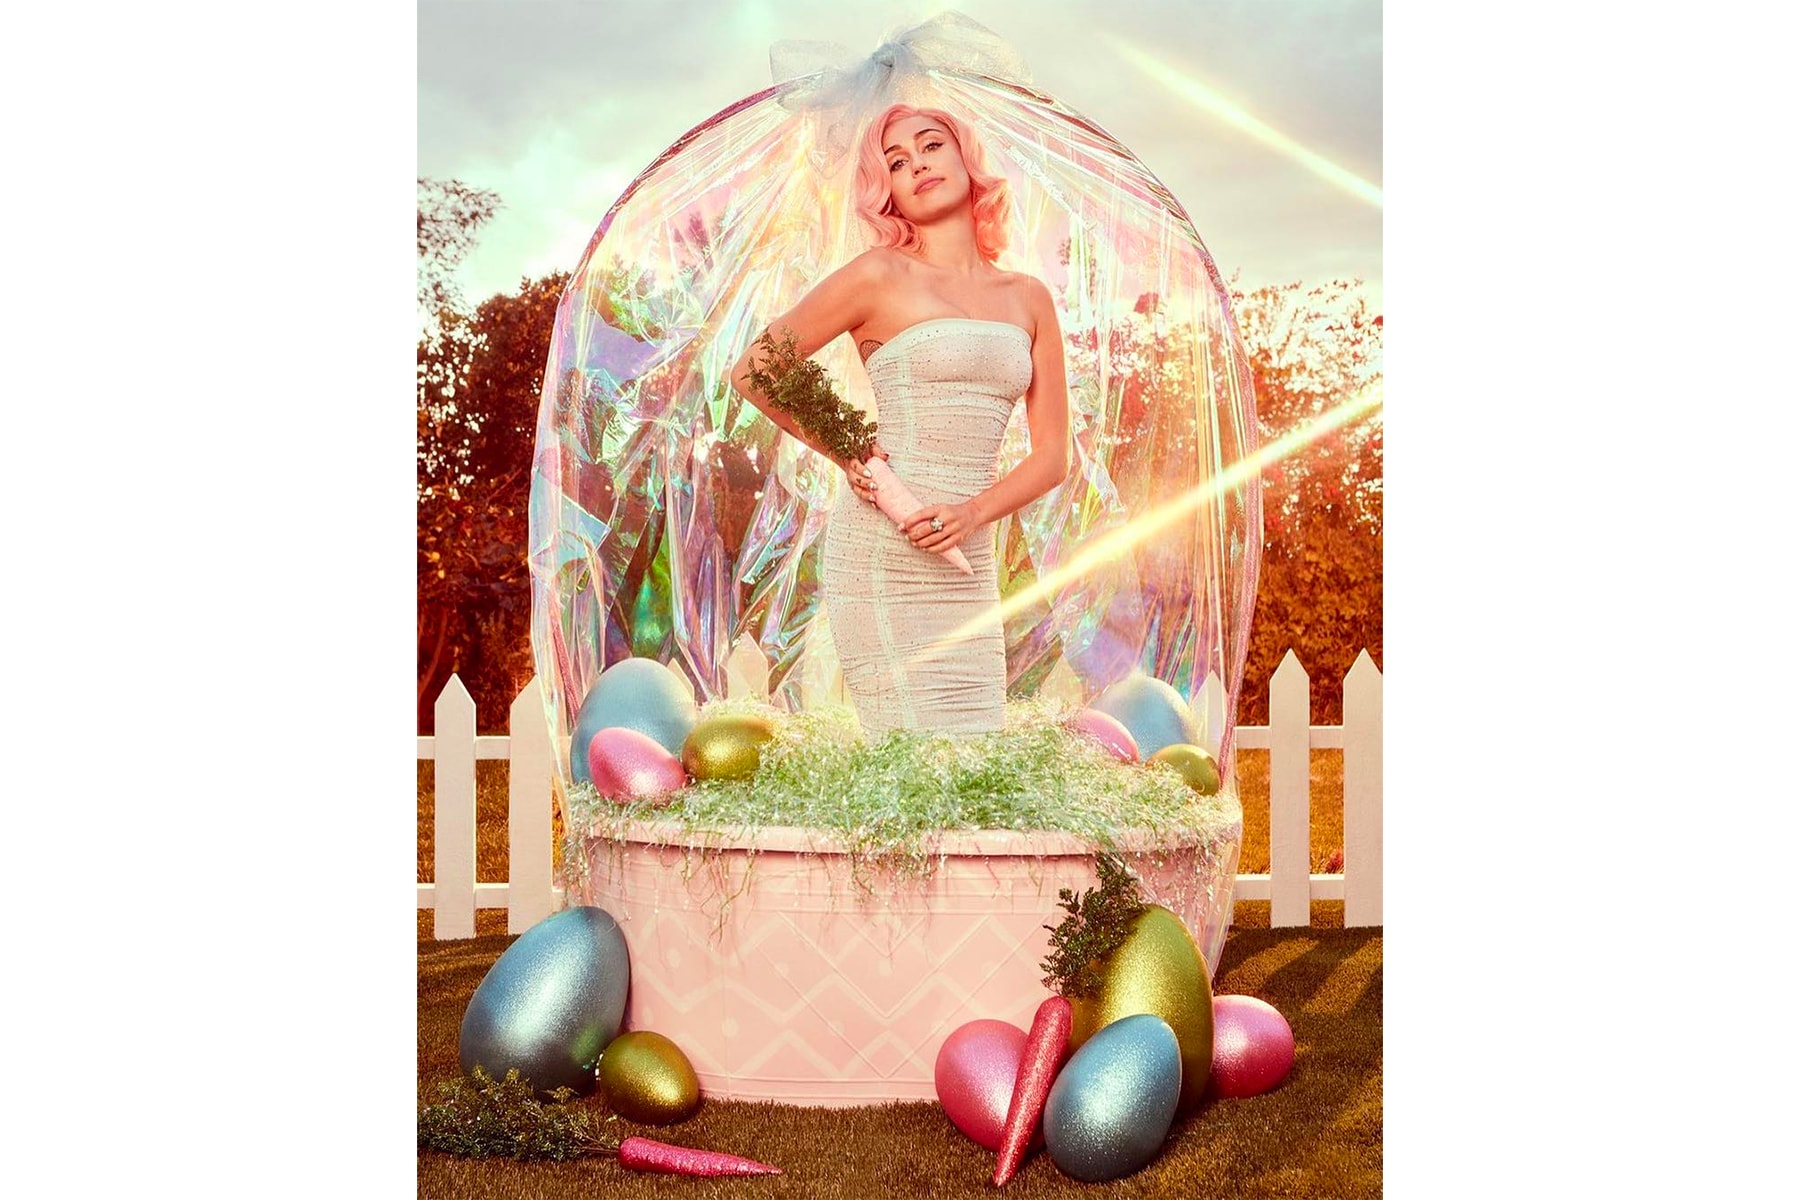 Miley Cyrus Easter 2018 Editorial Videos Photoshoot Pink Pastel Eggs Bunny Instagram